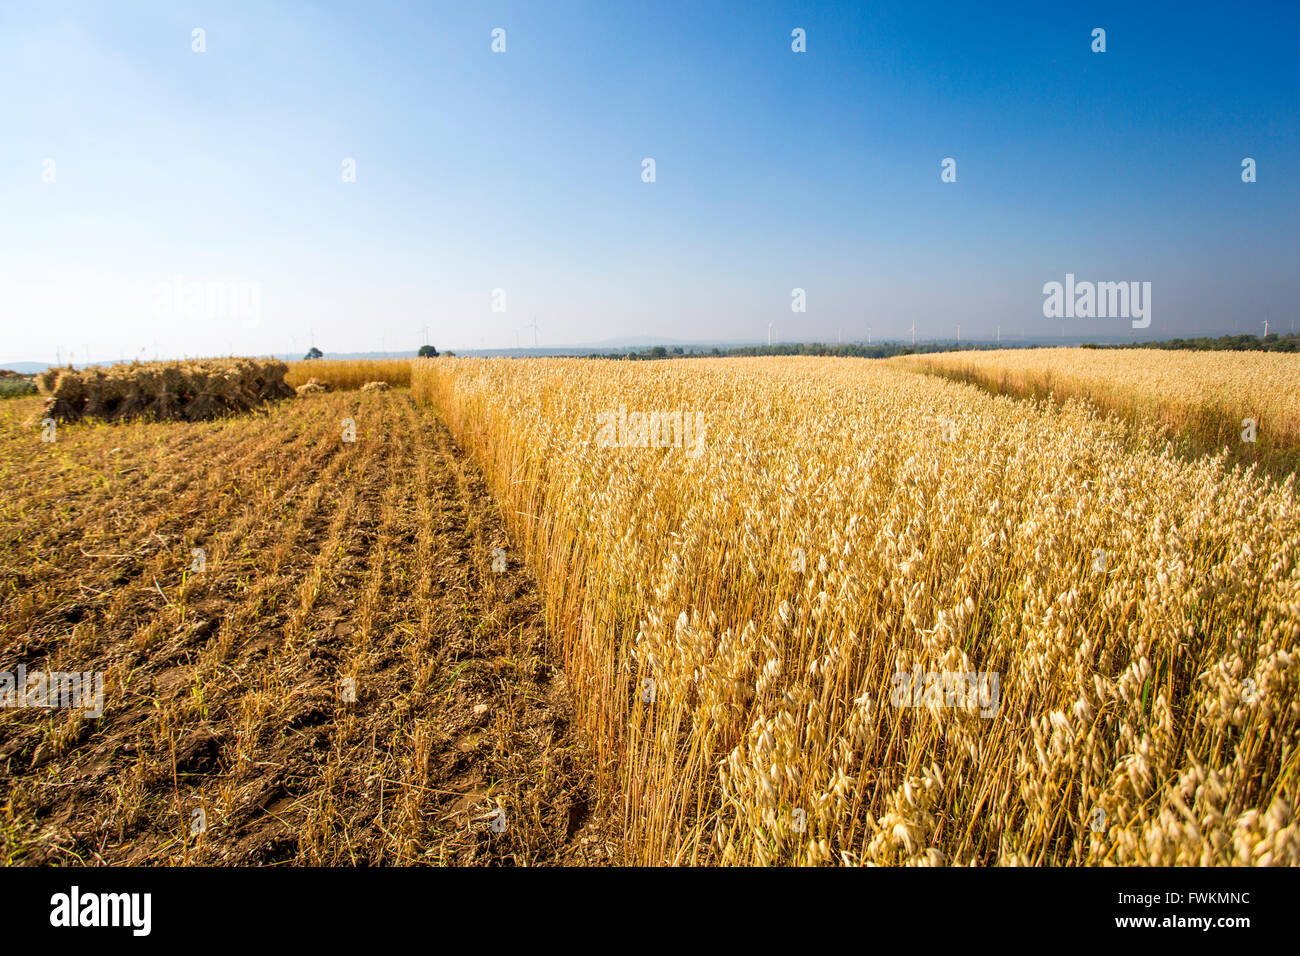 Harvest field in Hebei province, China Stock Photo